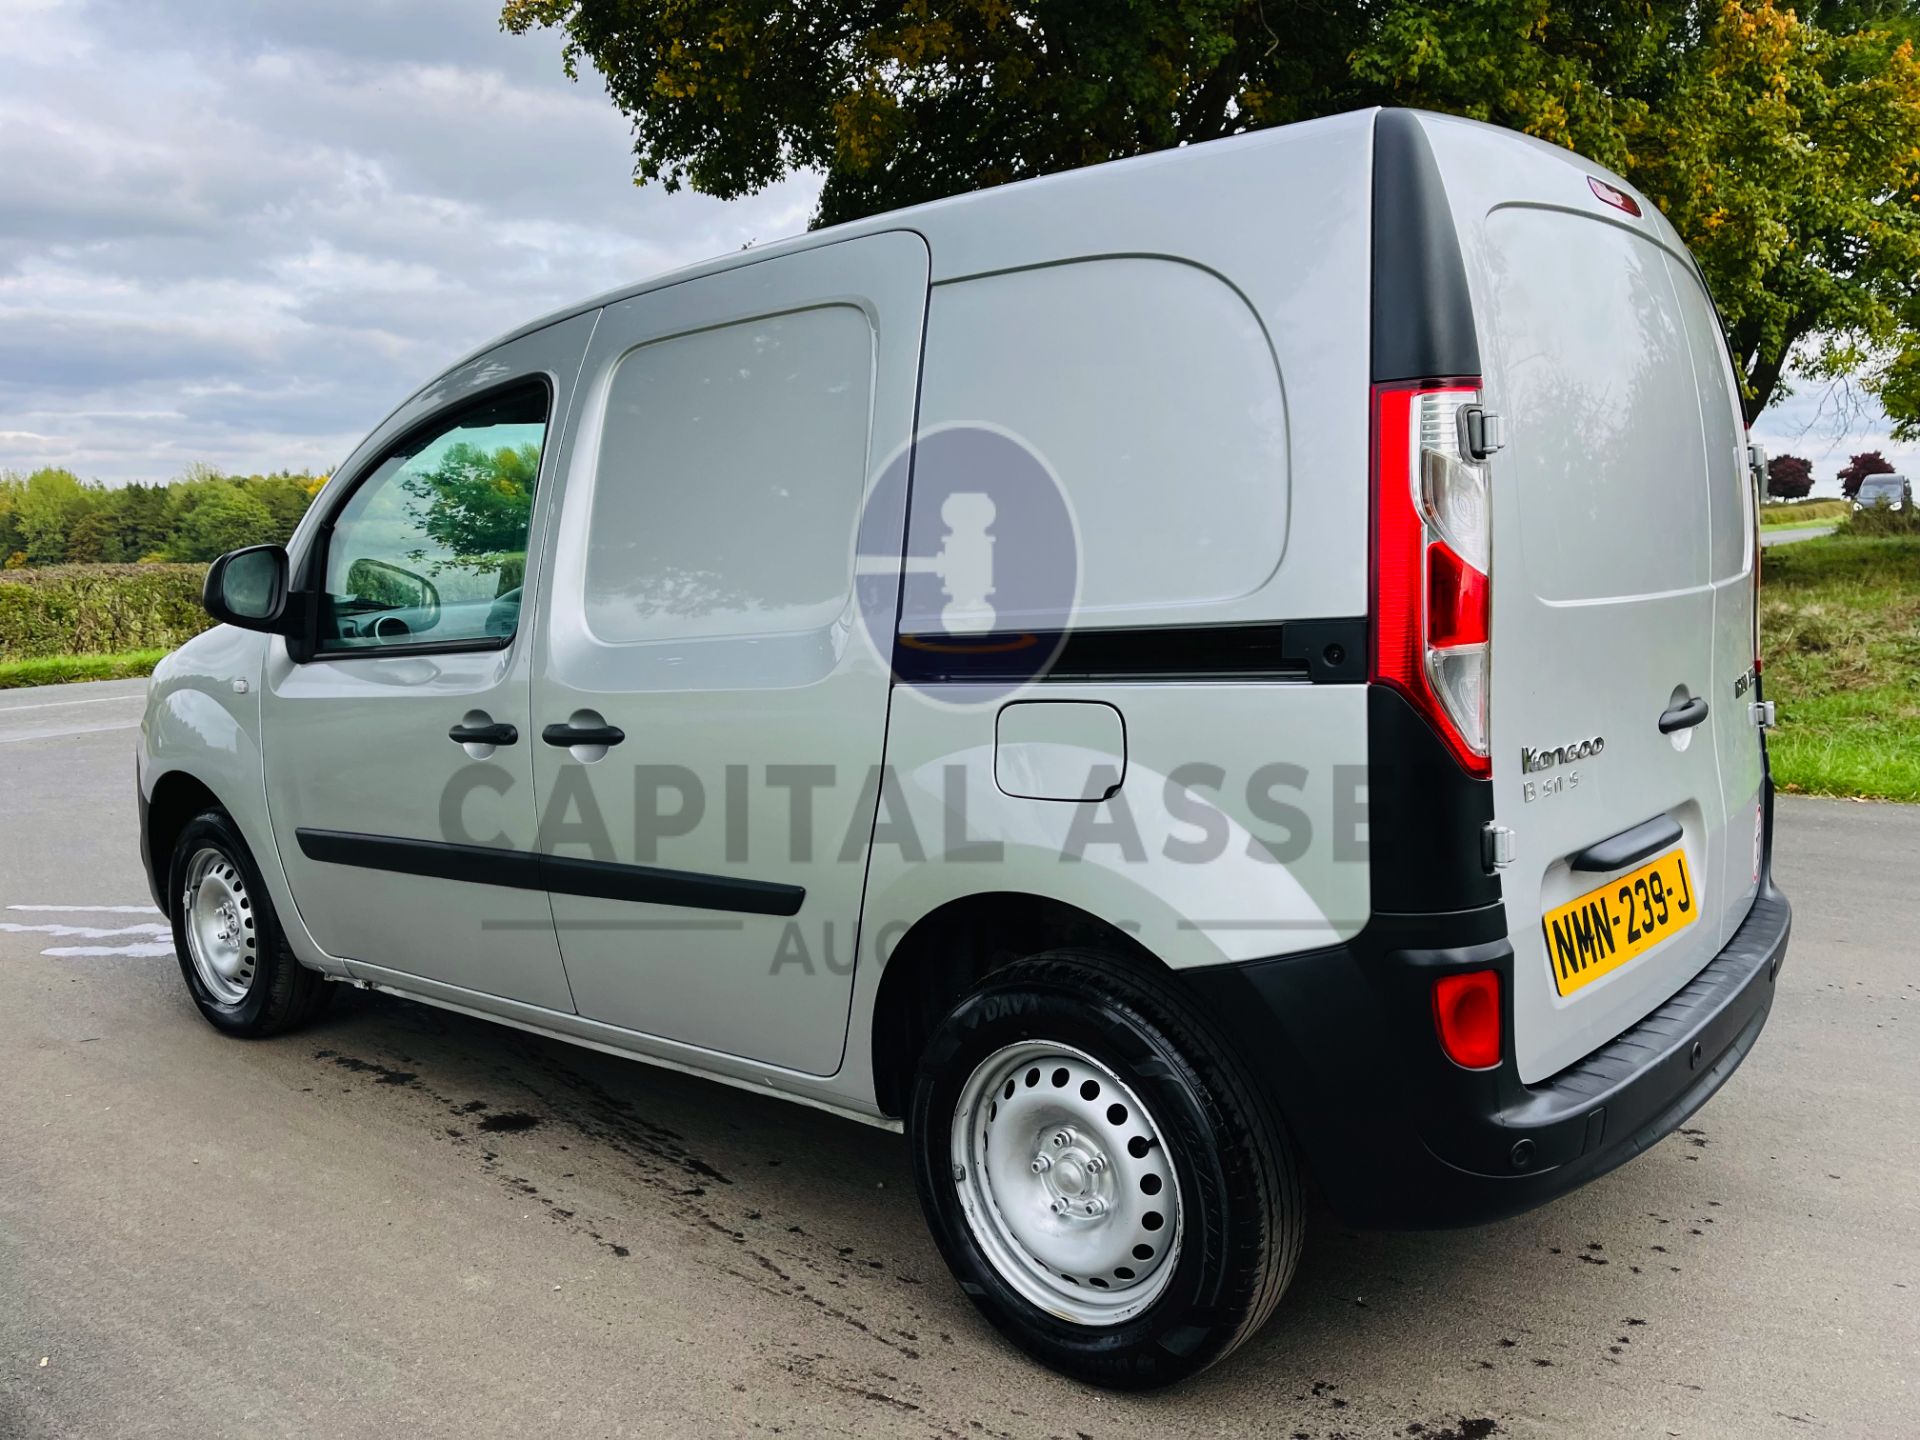 RENAULT KANGOO 1.5DCI "BUSINESS EDITION" 2018 -EURO 6/STOP START (AIR CON) ELEC PACK-TWIN SIDE DOORS - Image 11 of 21